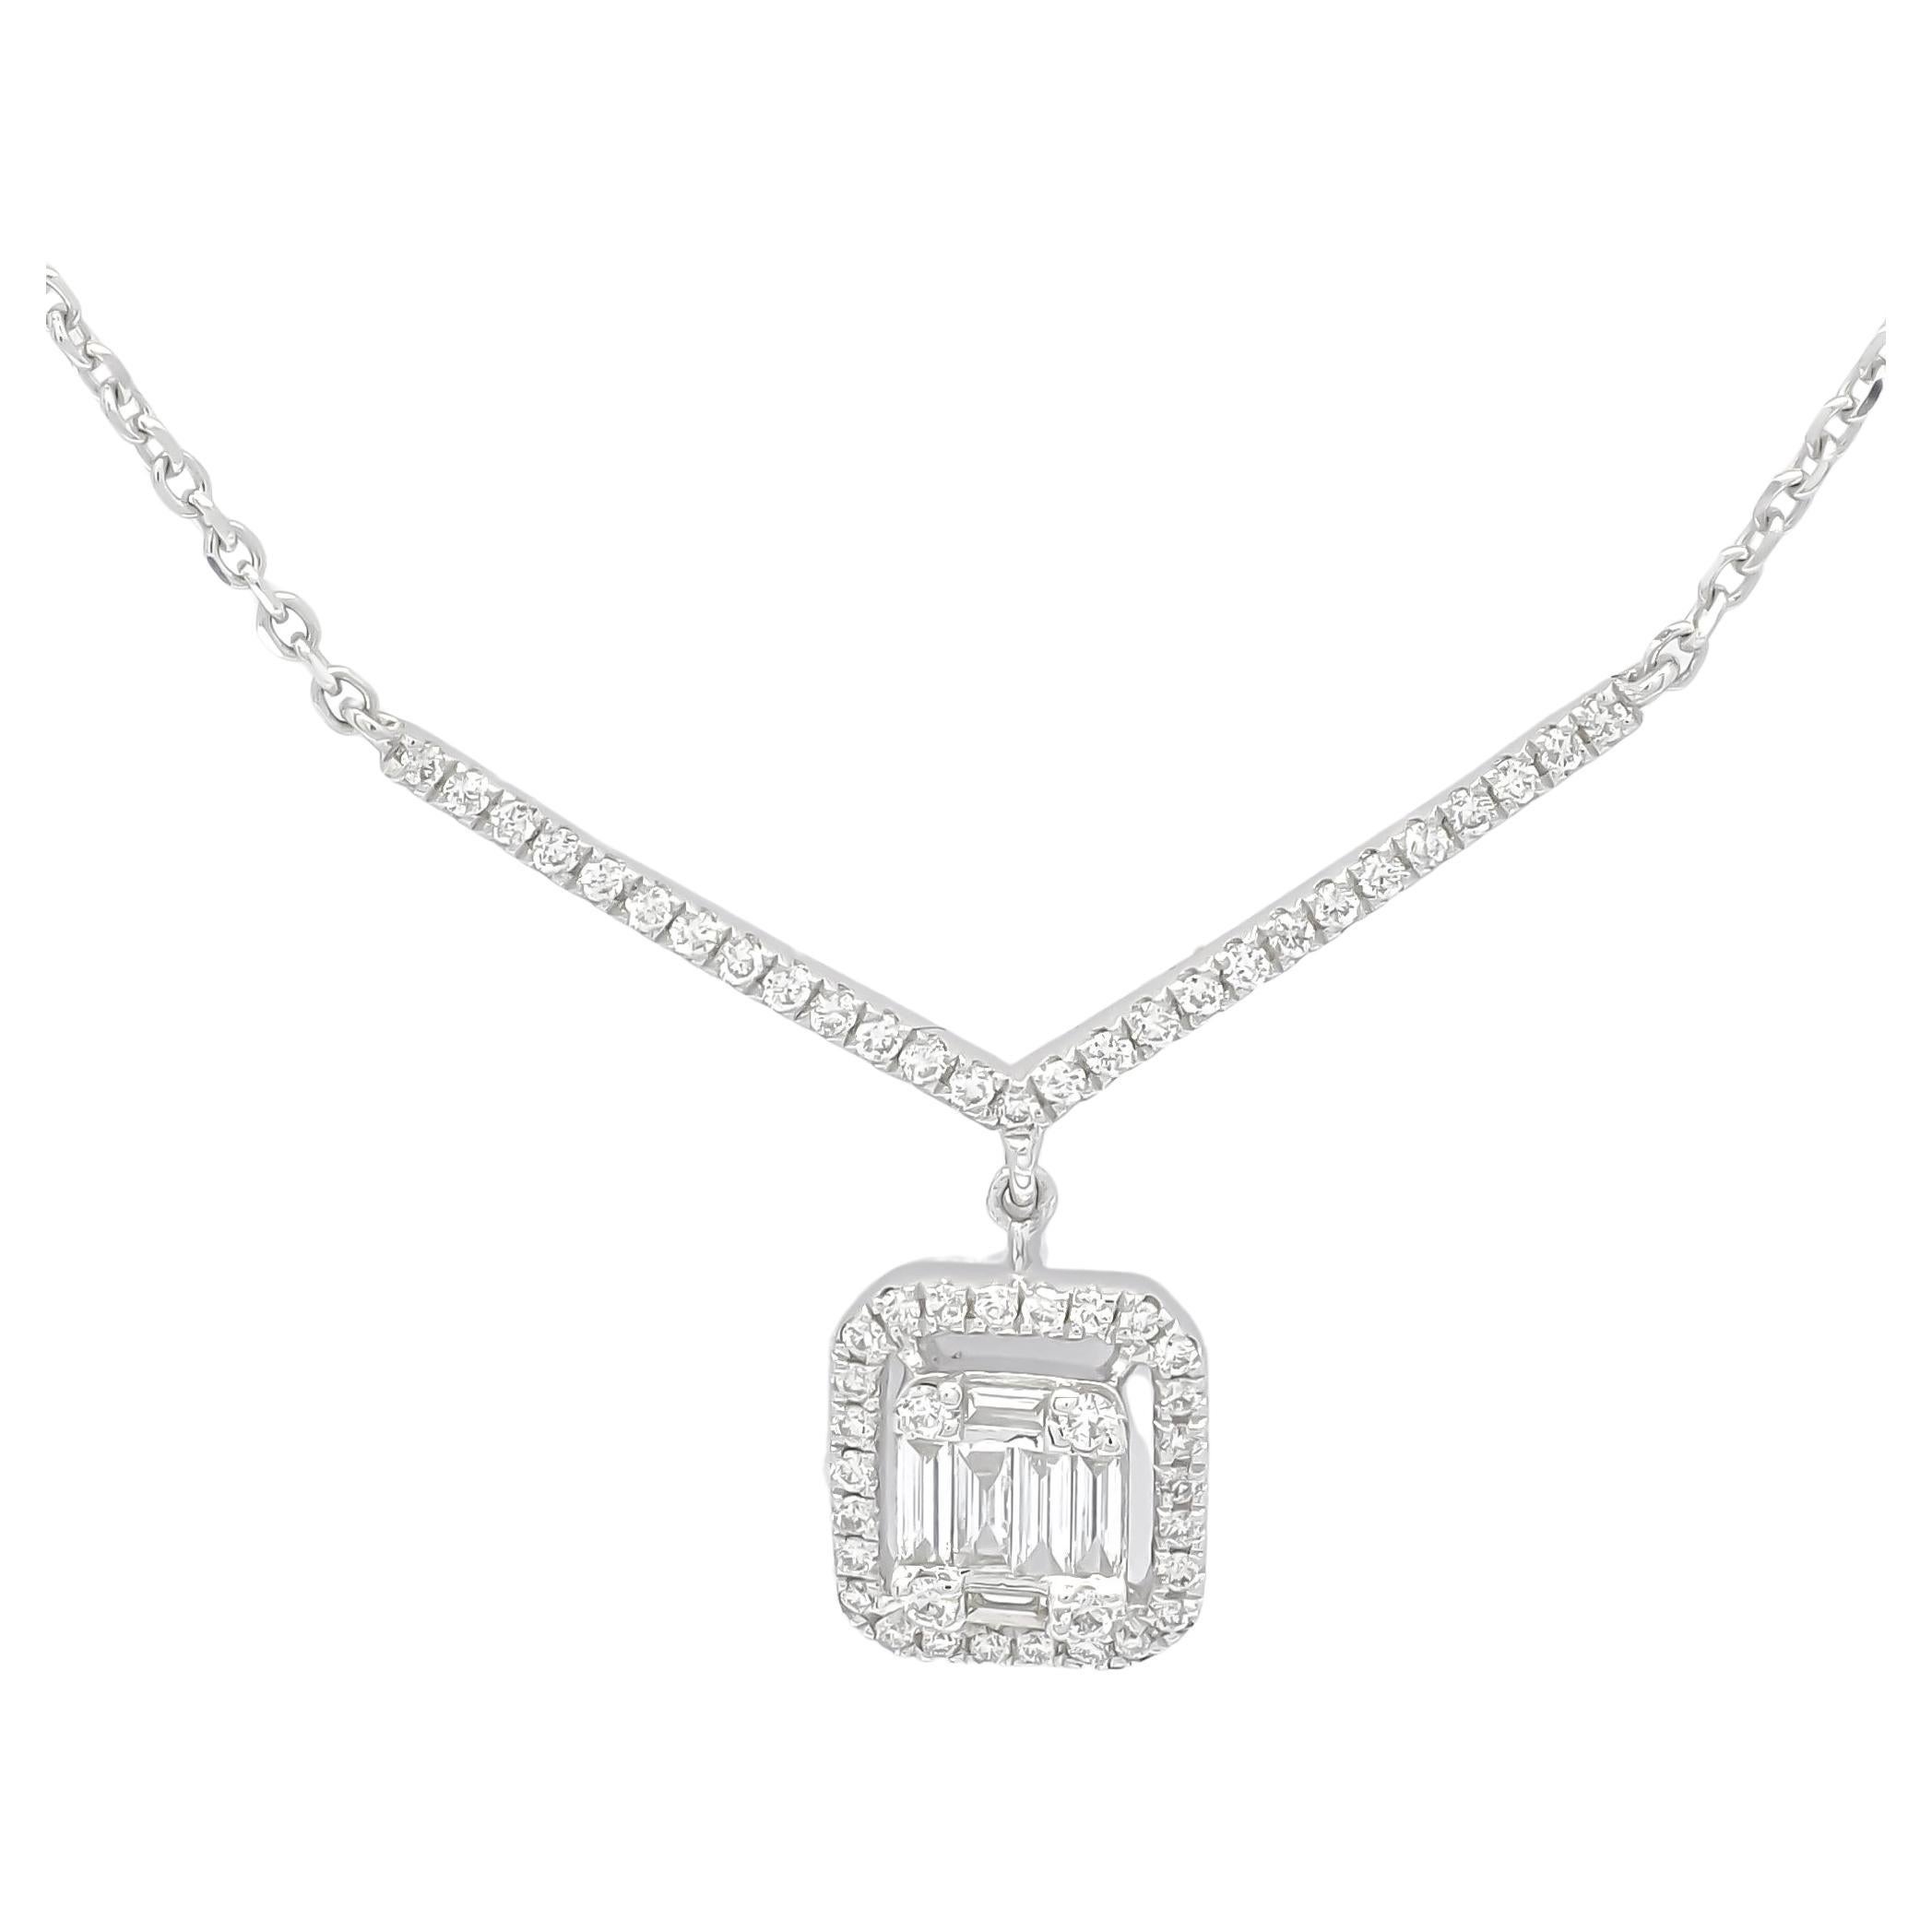 Natural Diamond Necklace 0.31 cts 18 Karat White Gold Single Row Necklace